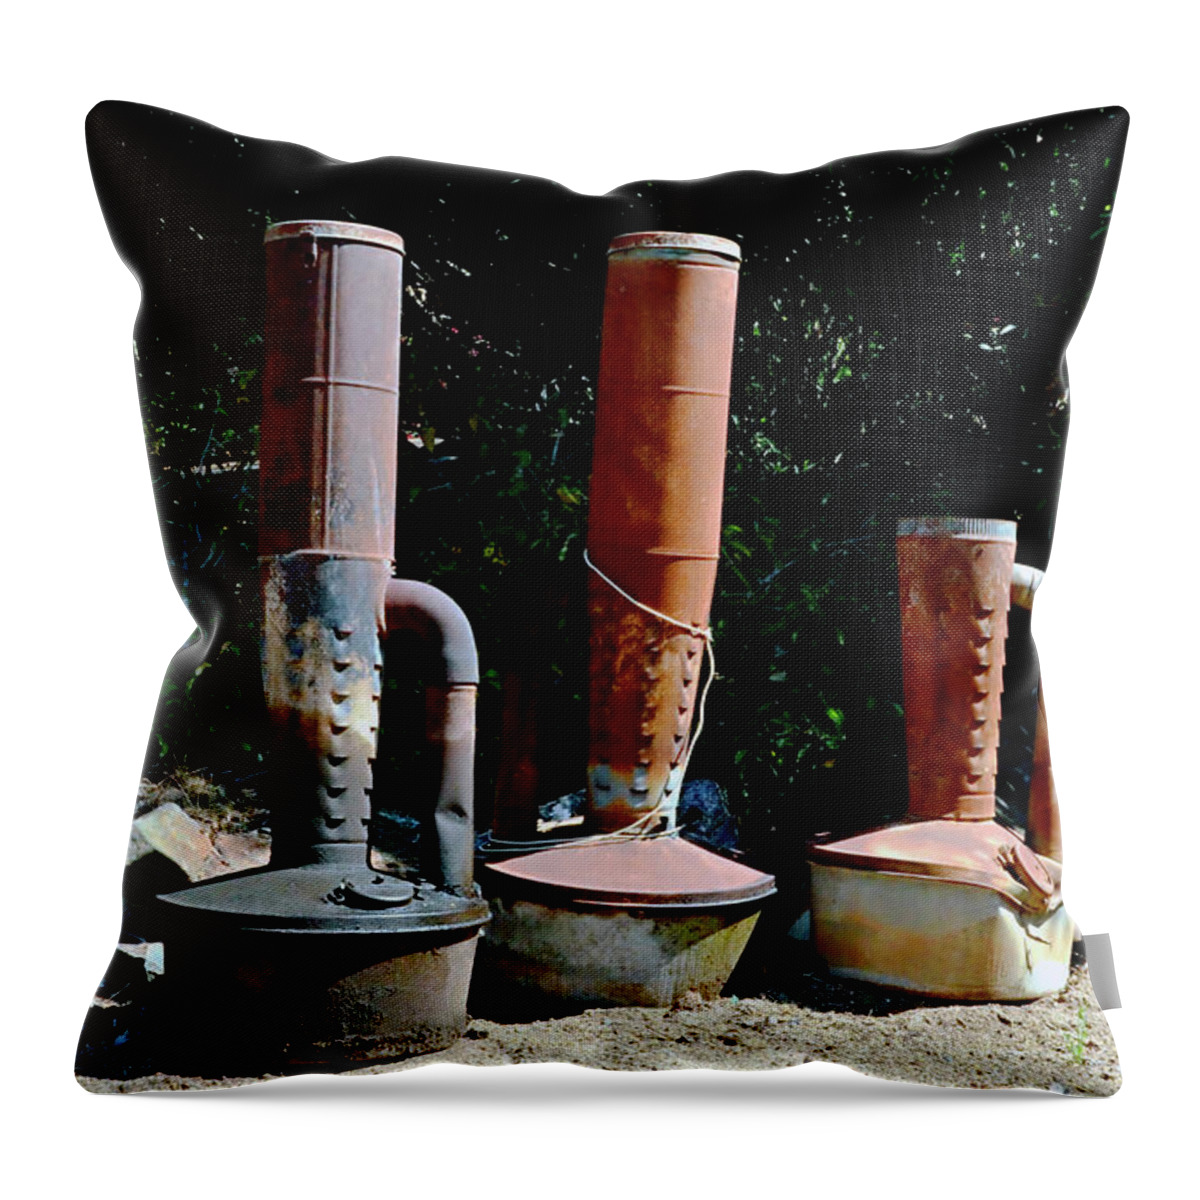  Throw Pillow featuring the photograph Smudge Pot Farming by Debby Pueschel